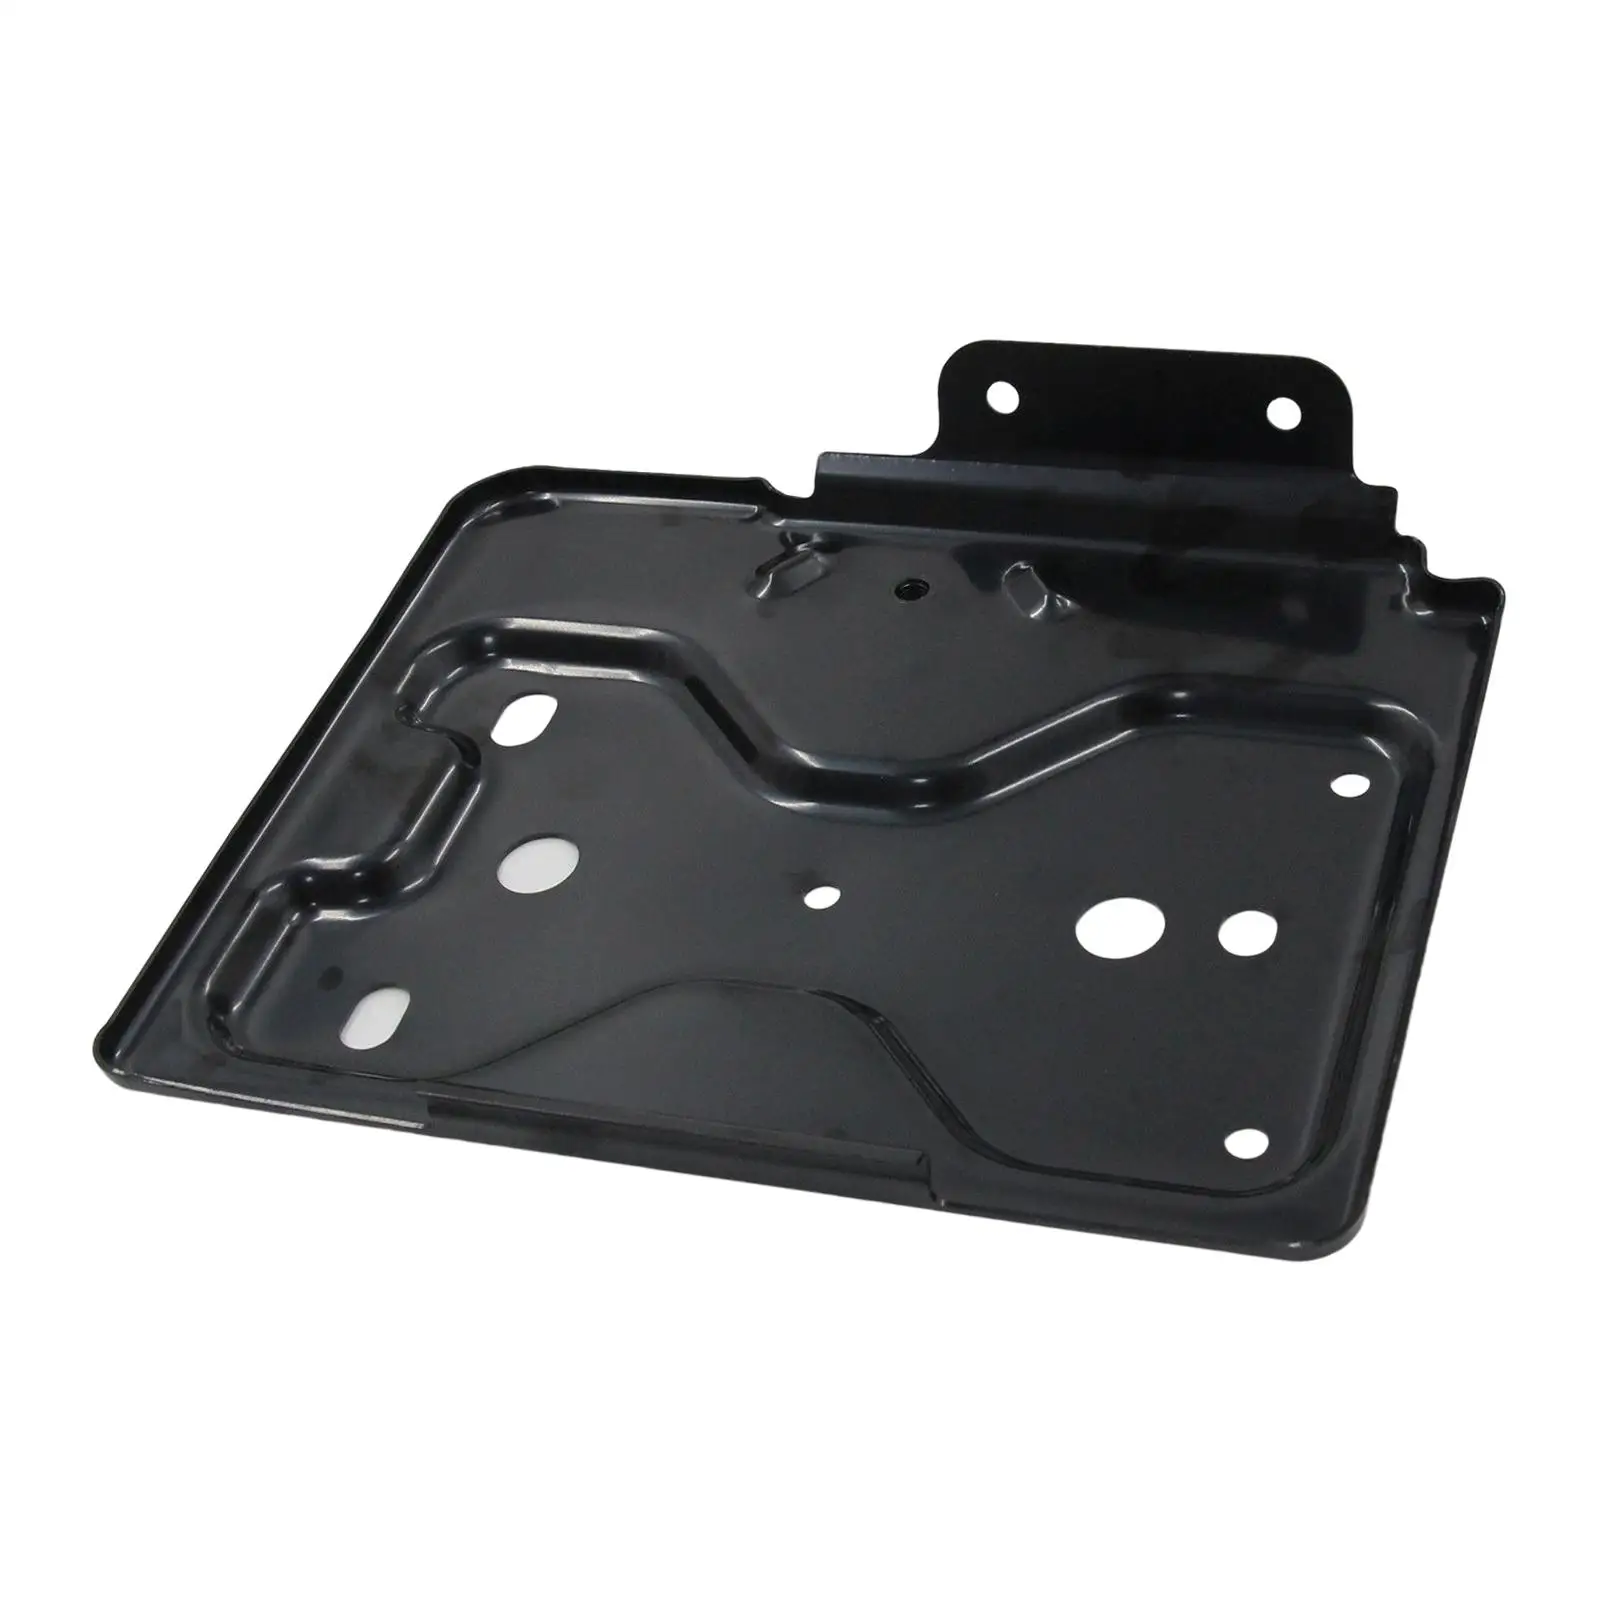 Driver Side Battery Tray Premium Durable Easy to Install Spare Parts Replaces Car Accessories for Chevrolet Silverado 1500